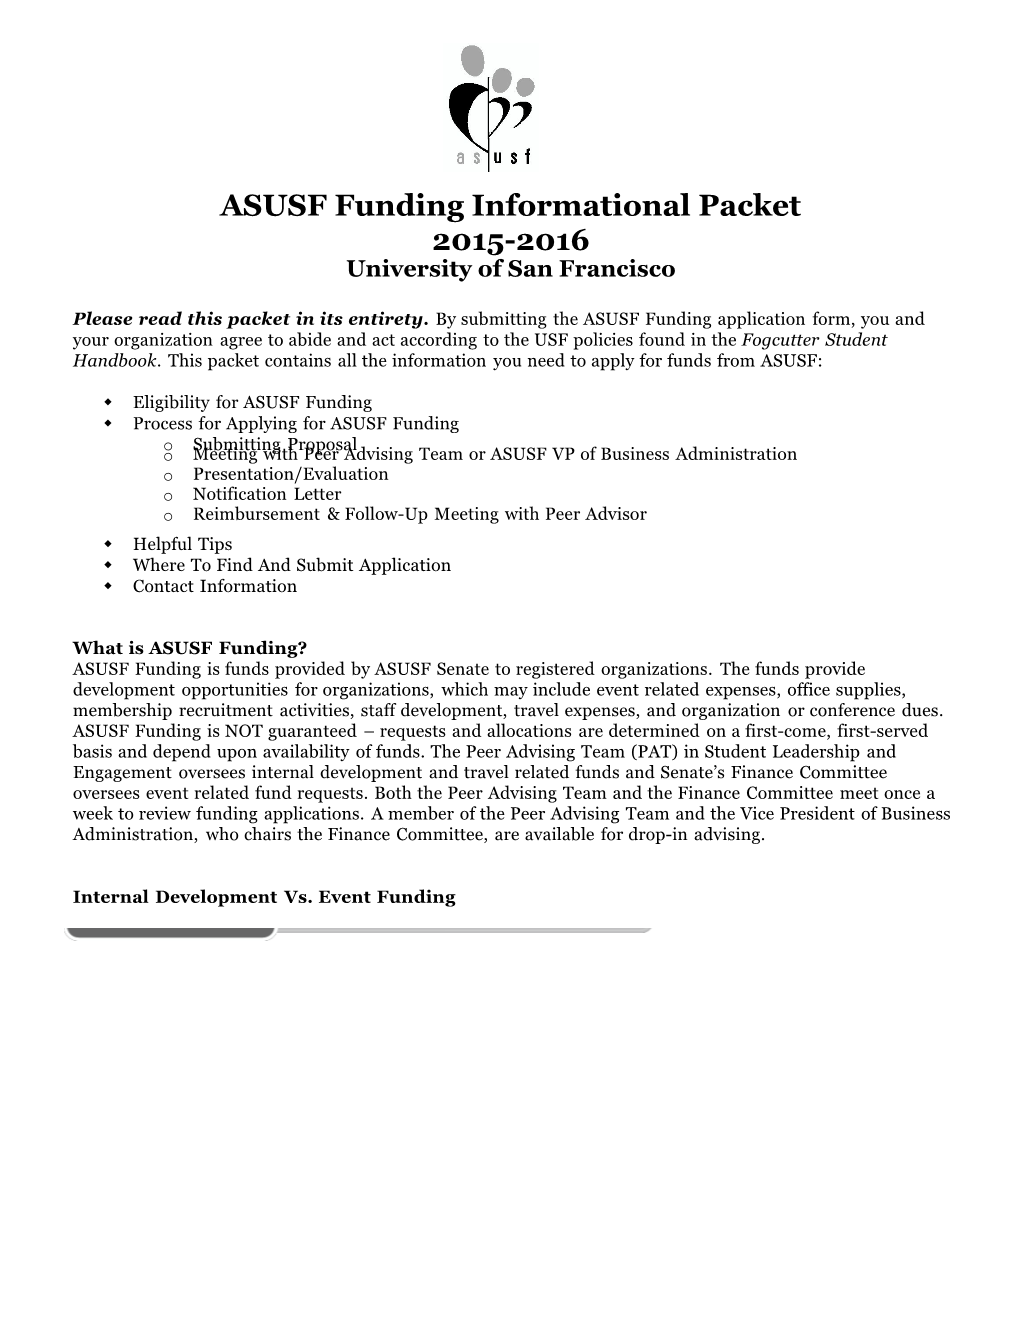 ASUSF Funding Informational Packet